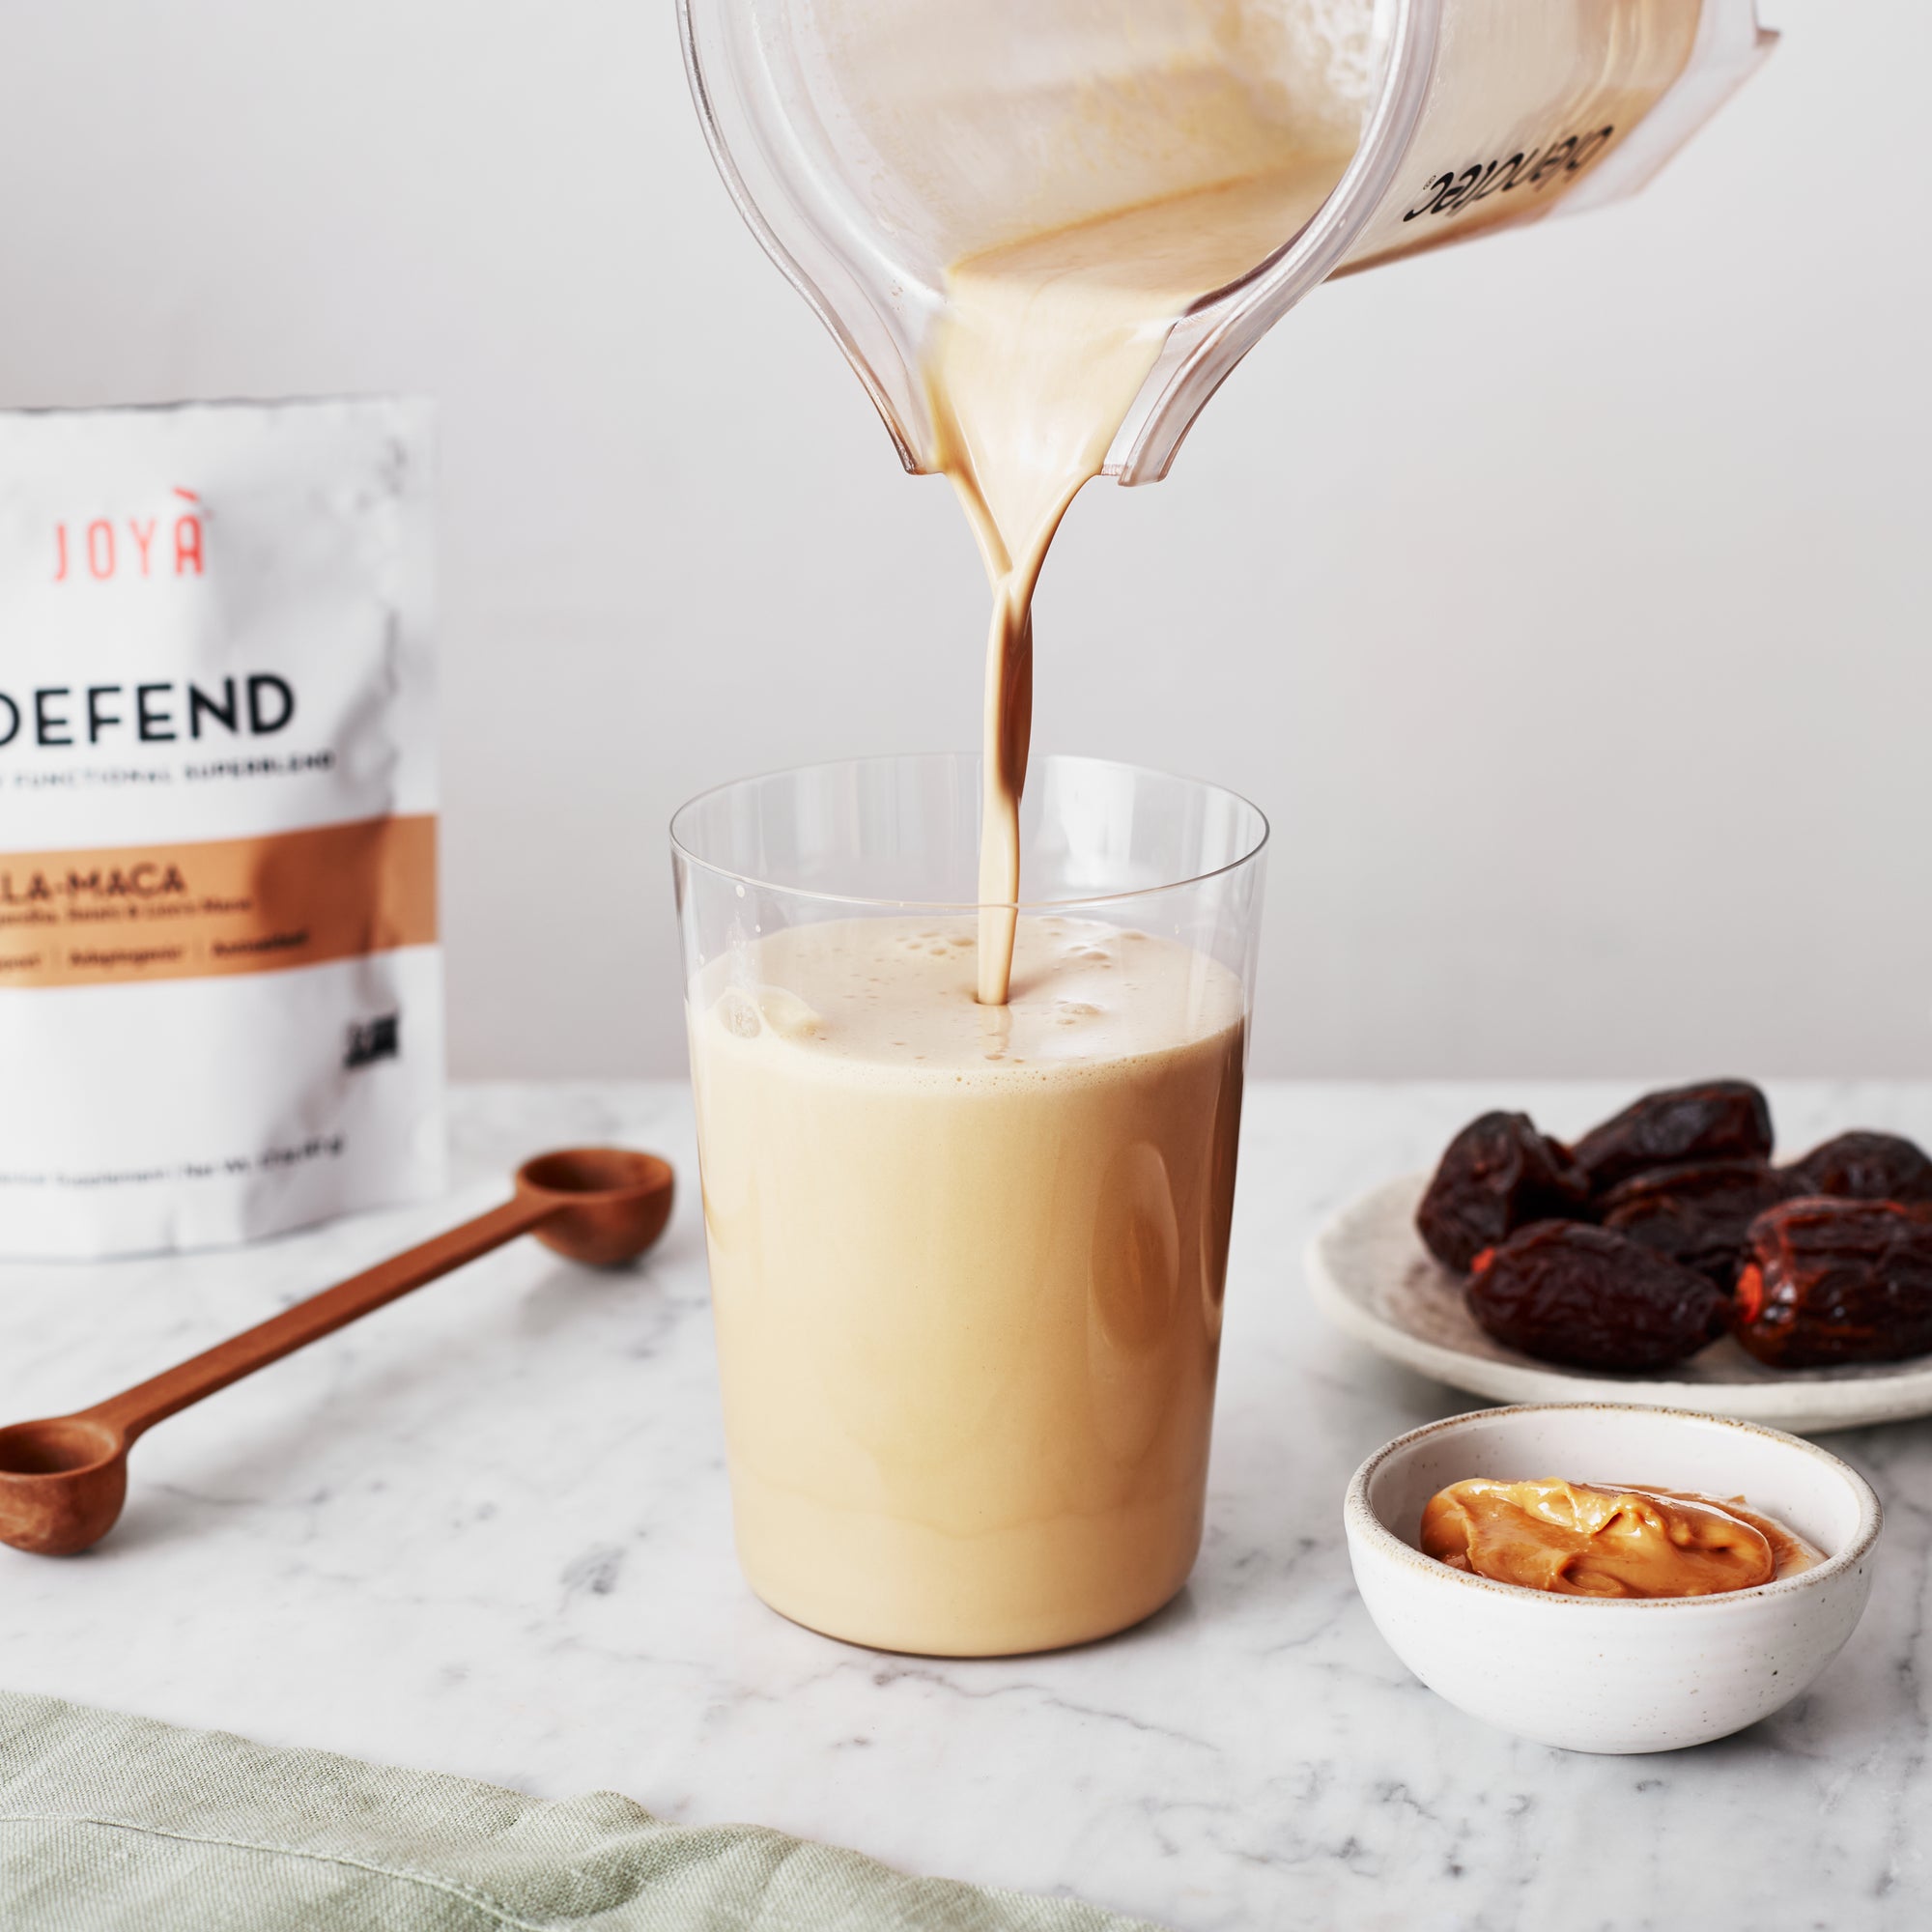 Endocrine Energy Coffee Date Shake with JOYÀ's Defend Superblend